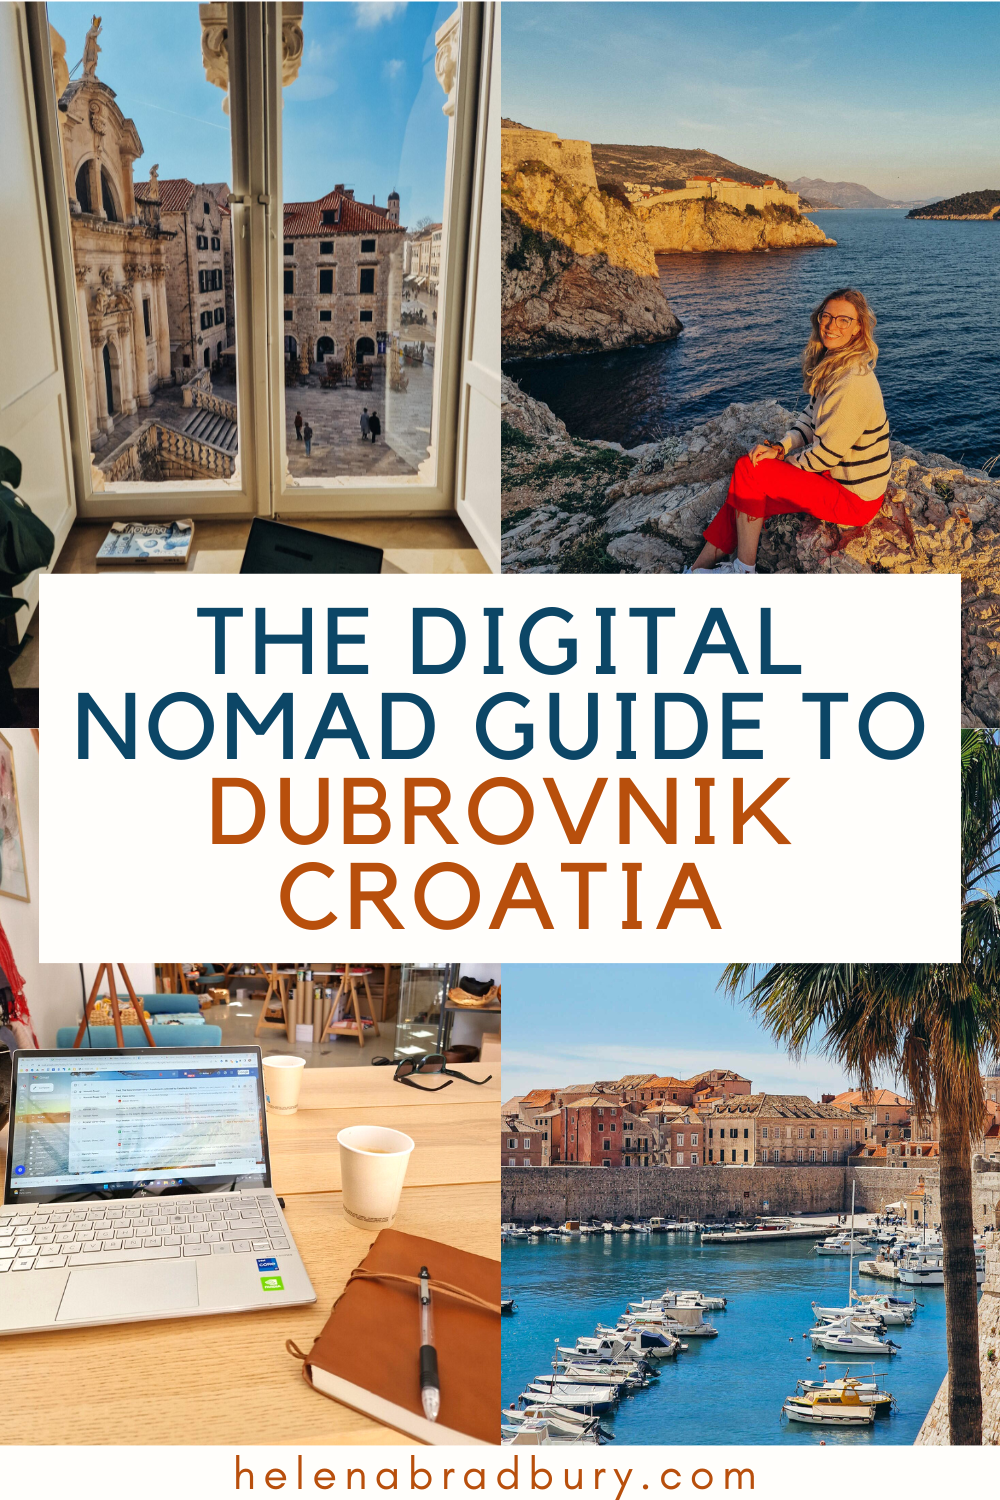 Spend longer visiting Dubrovnik as a digital nomad and make the most of your stay with this digital nomad’s guide to Dubrovnik, Croatia’s famous walled city. | croatia digital nomad | dubrovnik digital nomads | digital nomad travel guide | digital no